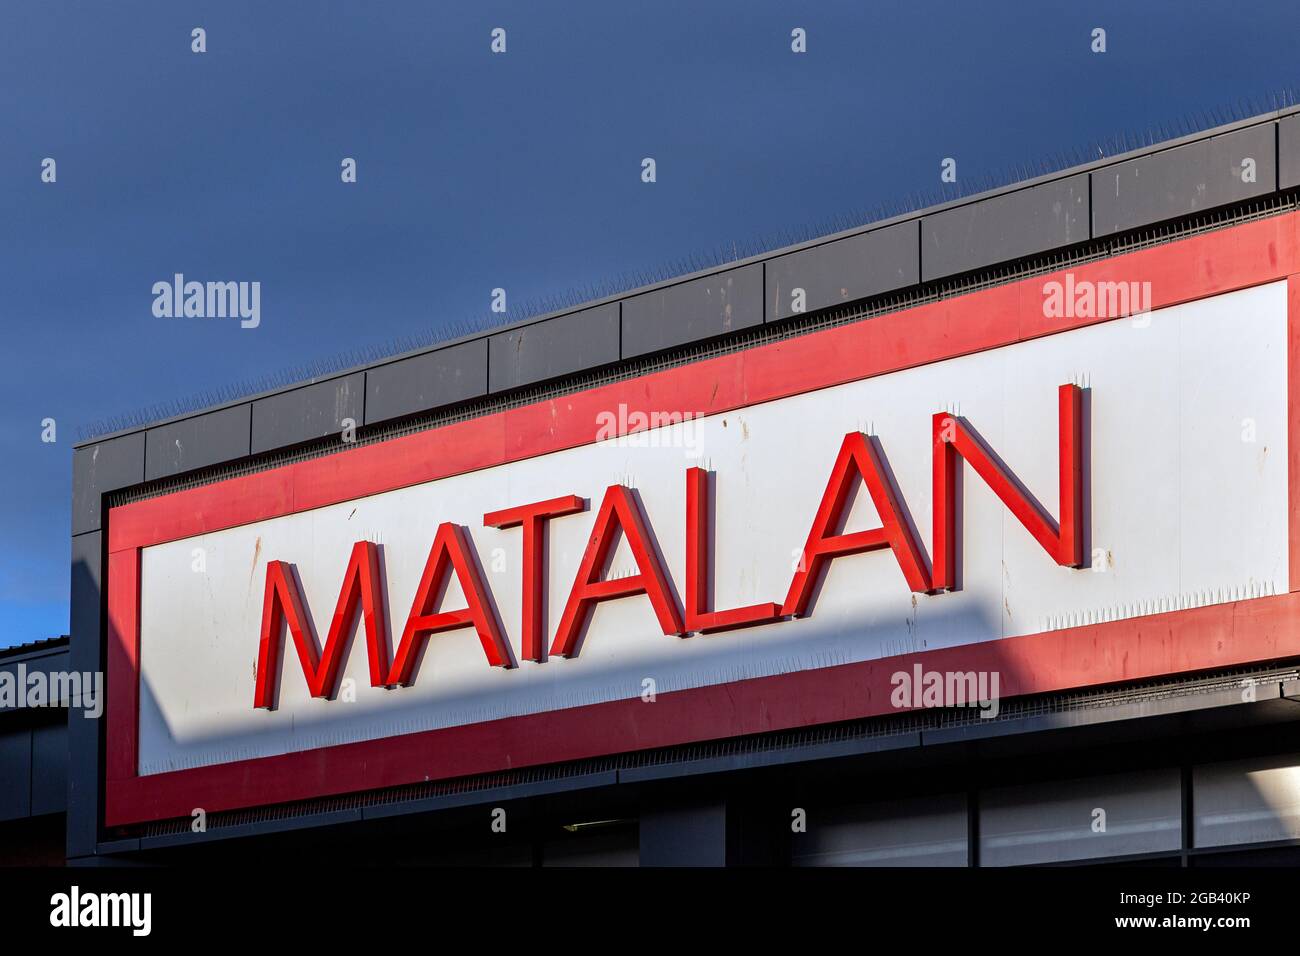 Matalan is a British fashion and homeware retailer based in Knowsley, Merseyside. Stock Photo